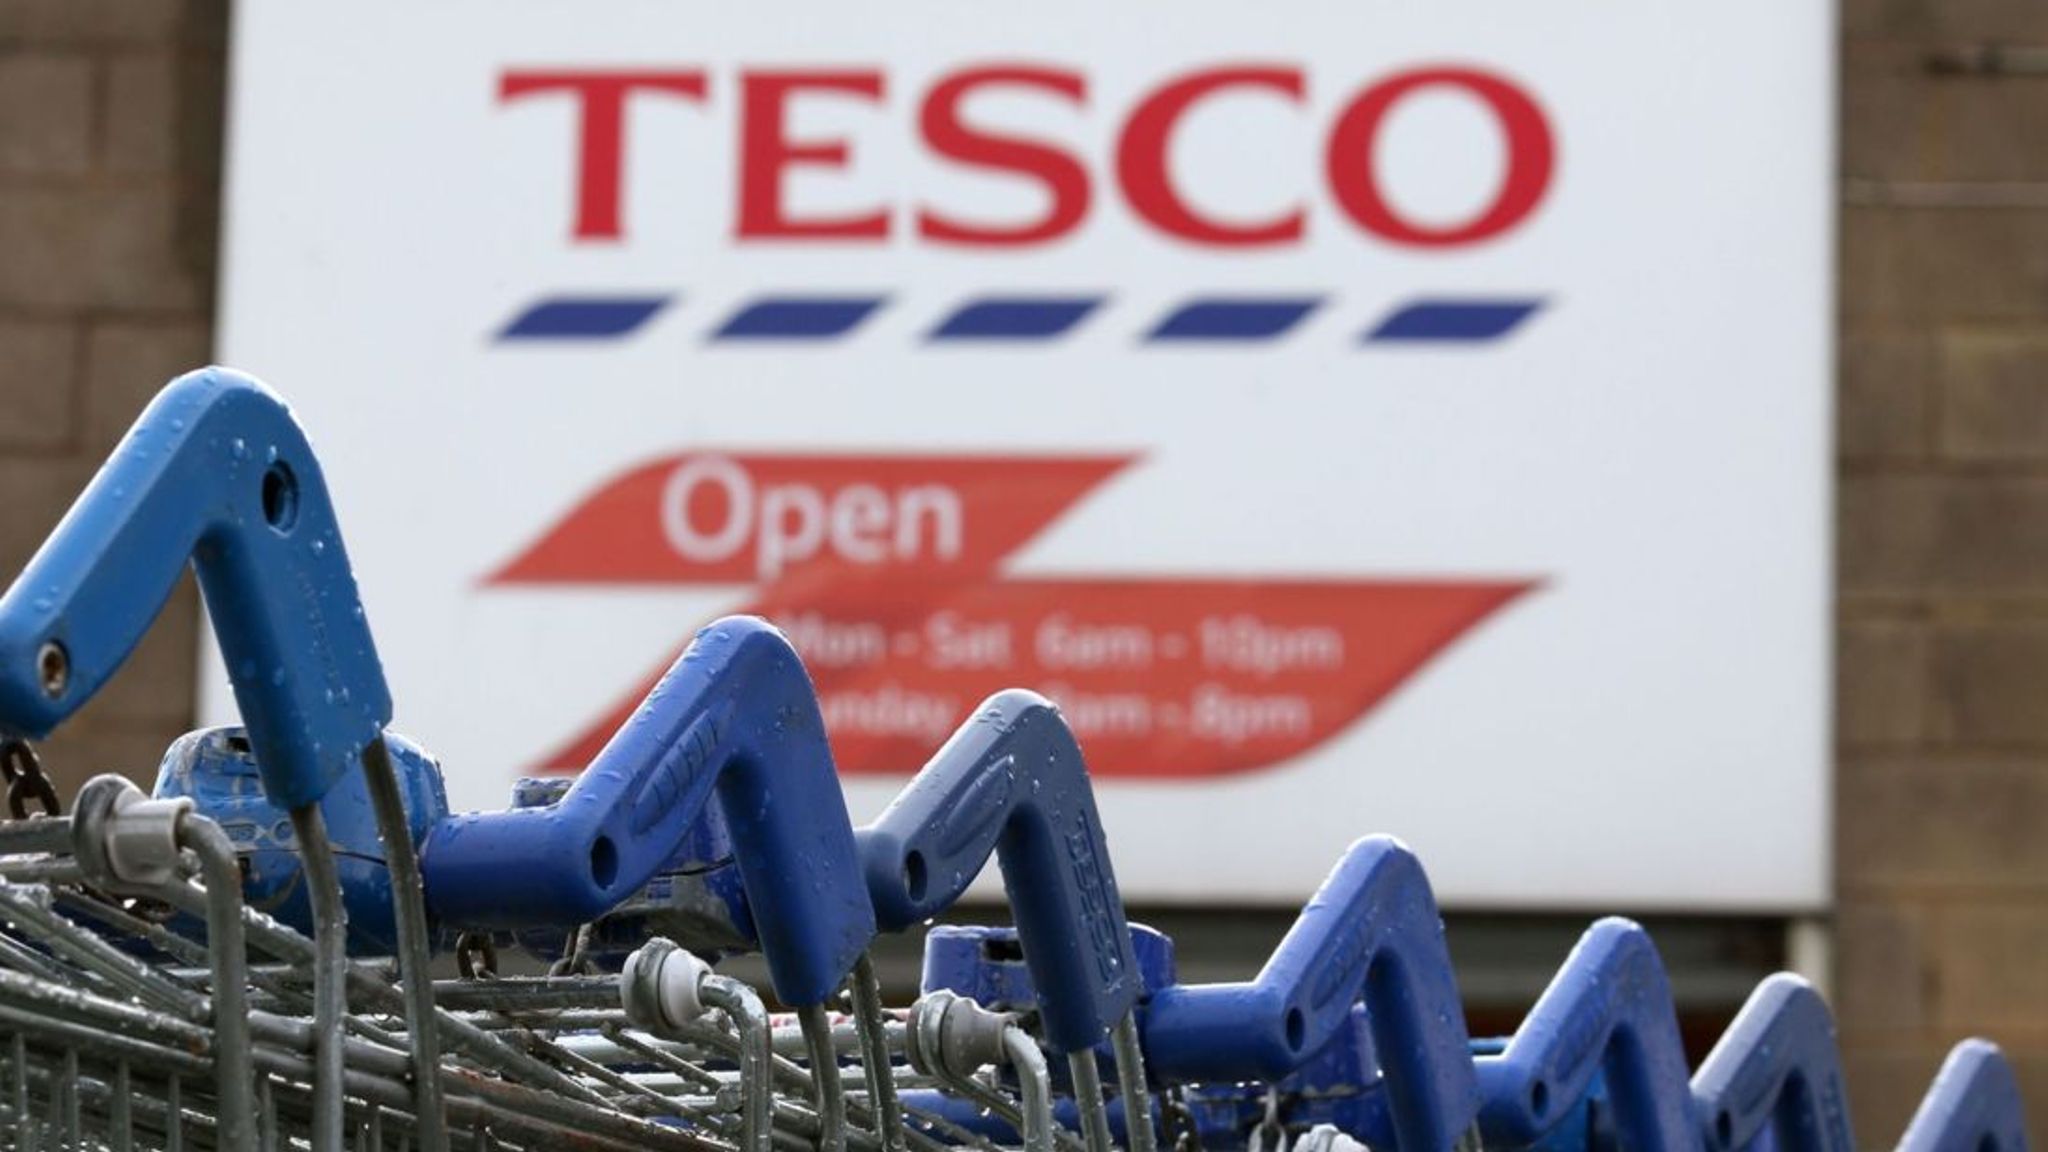 Tesco to make big changes to stores, affecting 2,100 jobs, Tesco